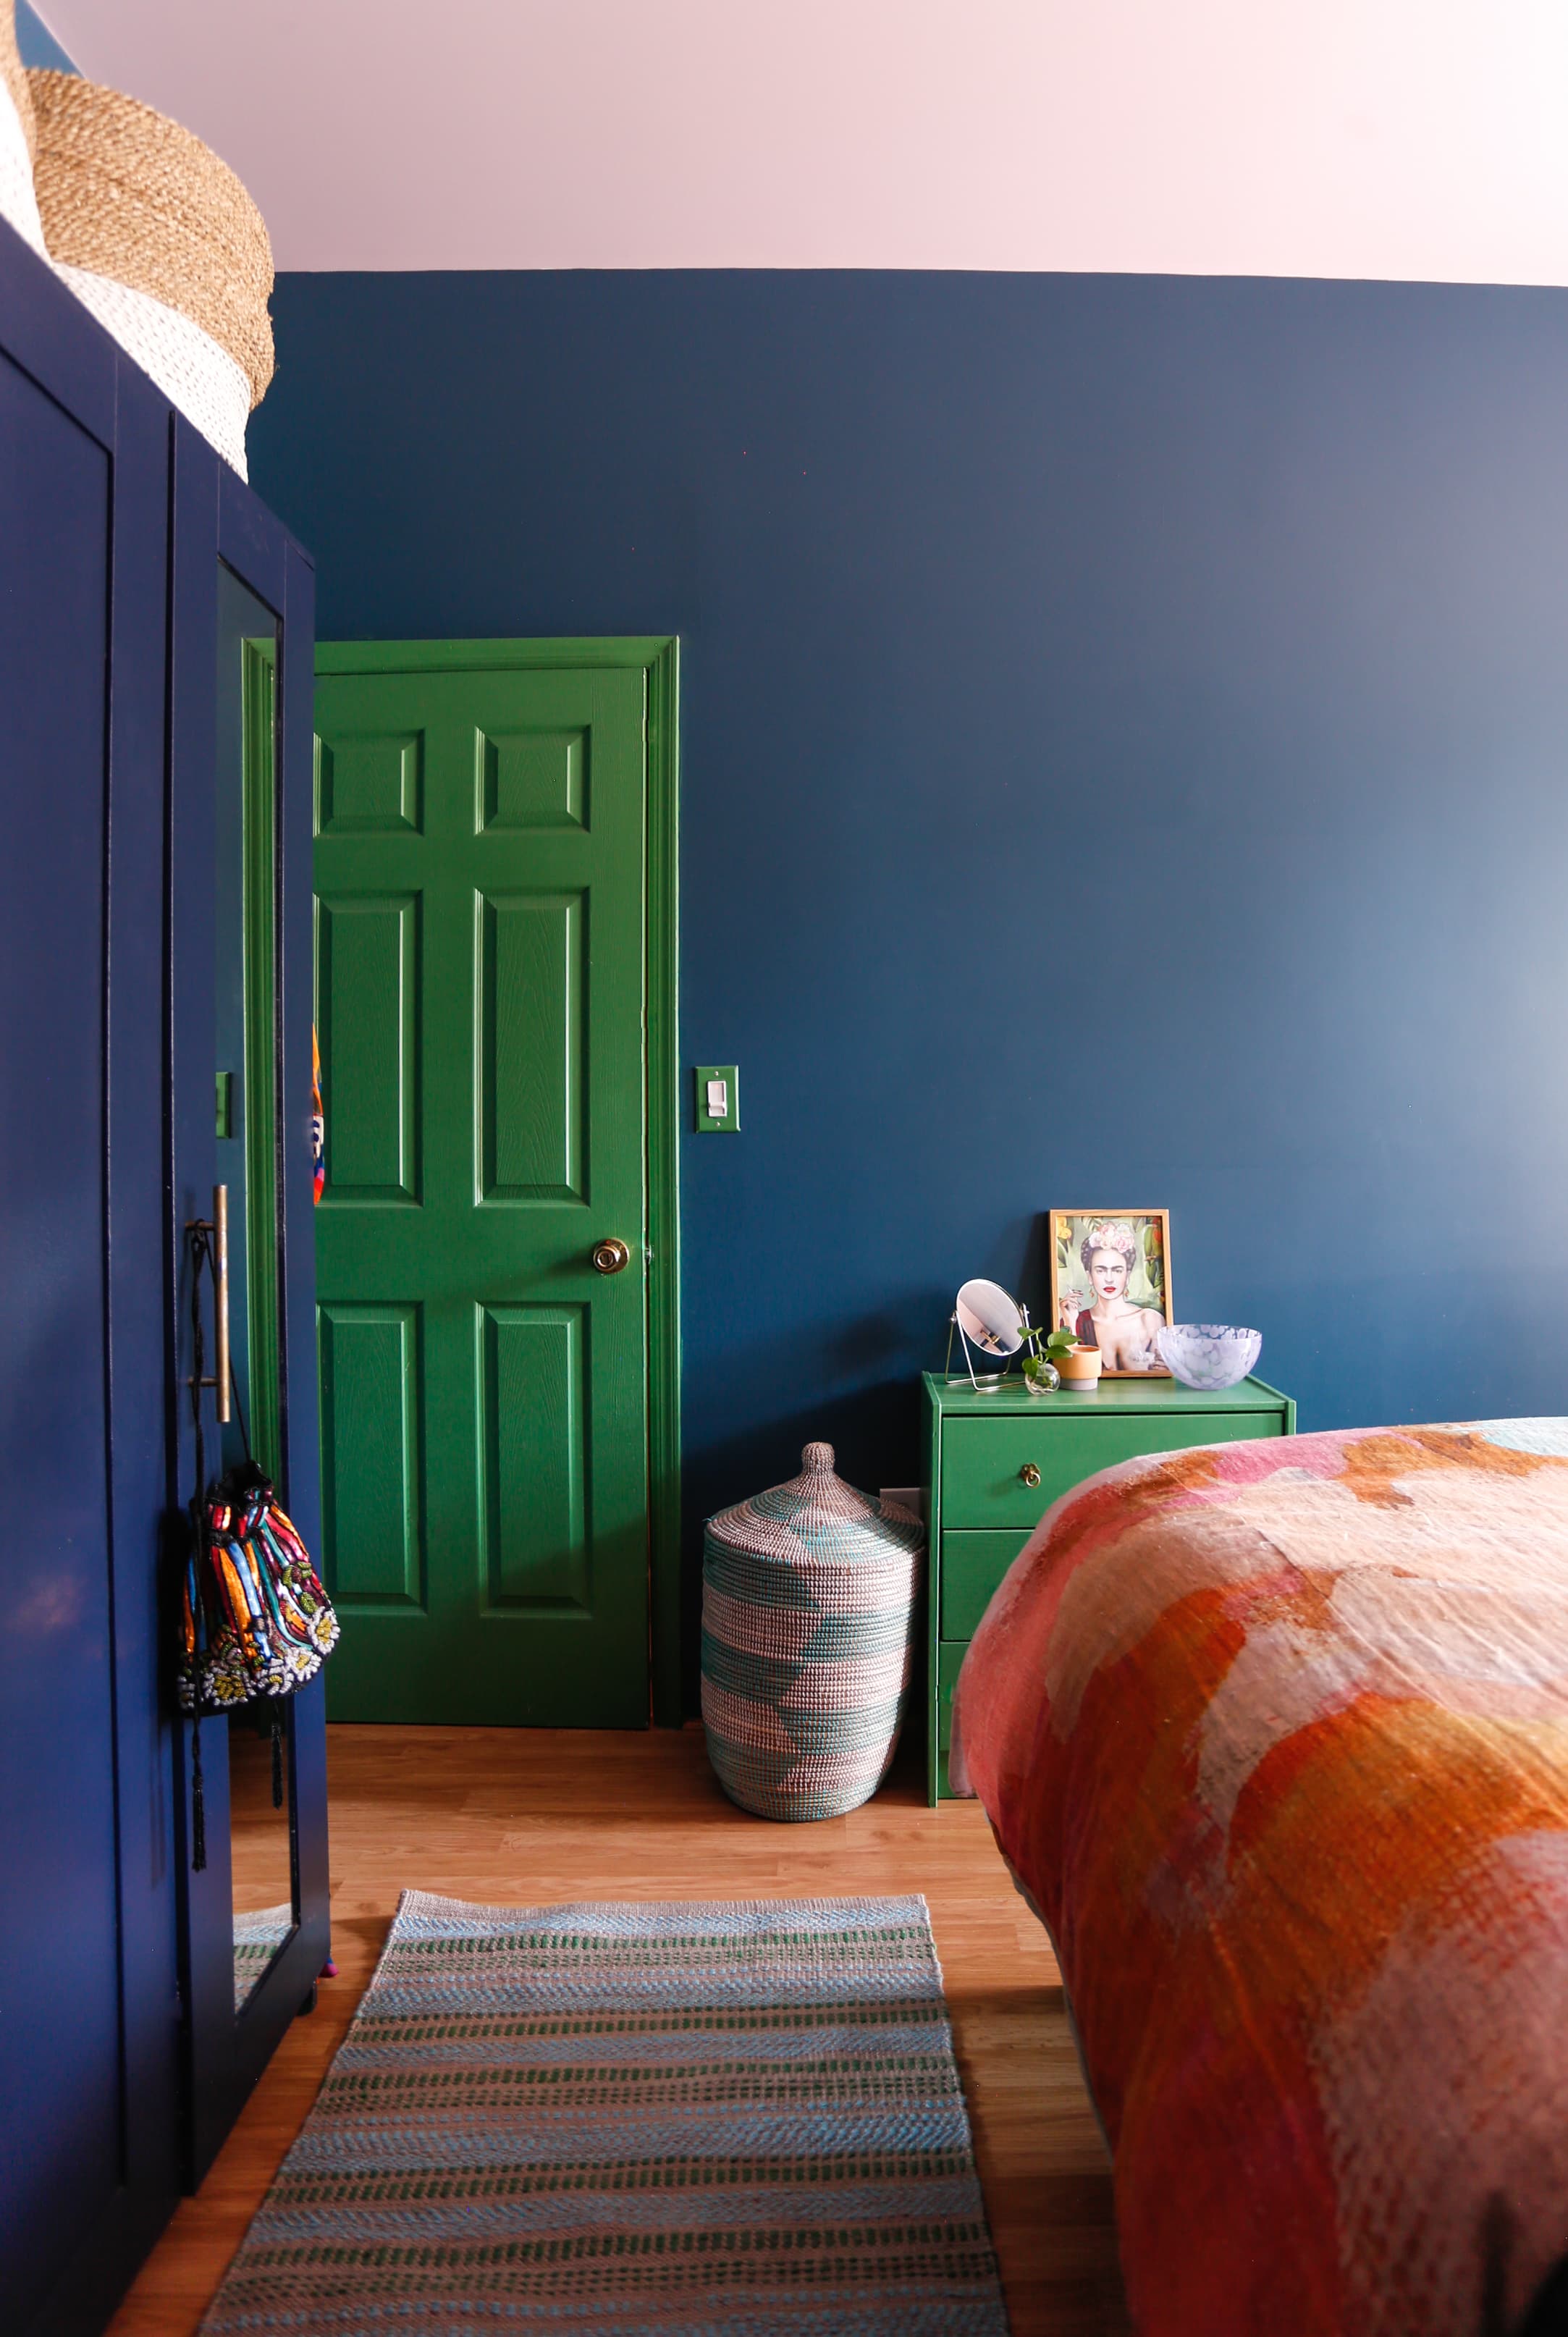 20 Simple Ways to Add More Color to Your Home for Less Than $20 | Apartment  Therapy